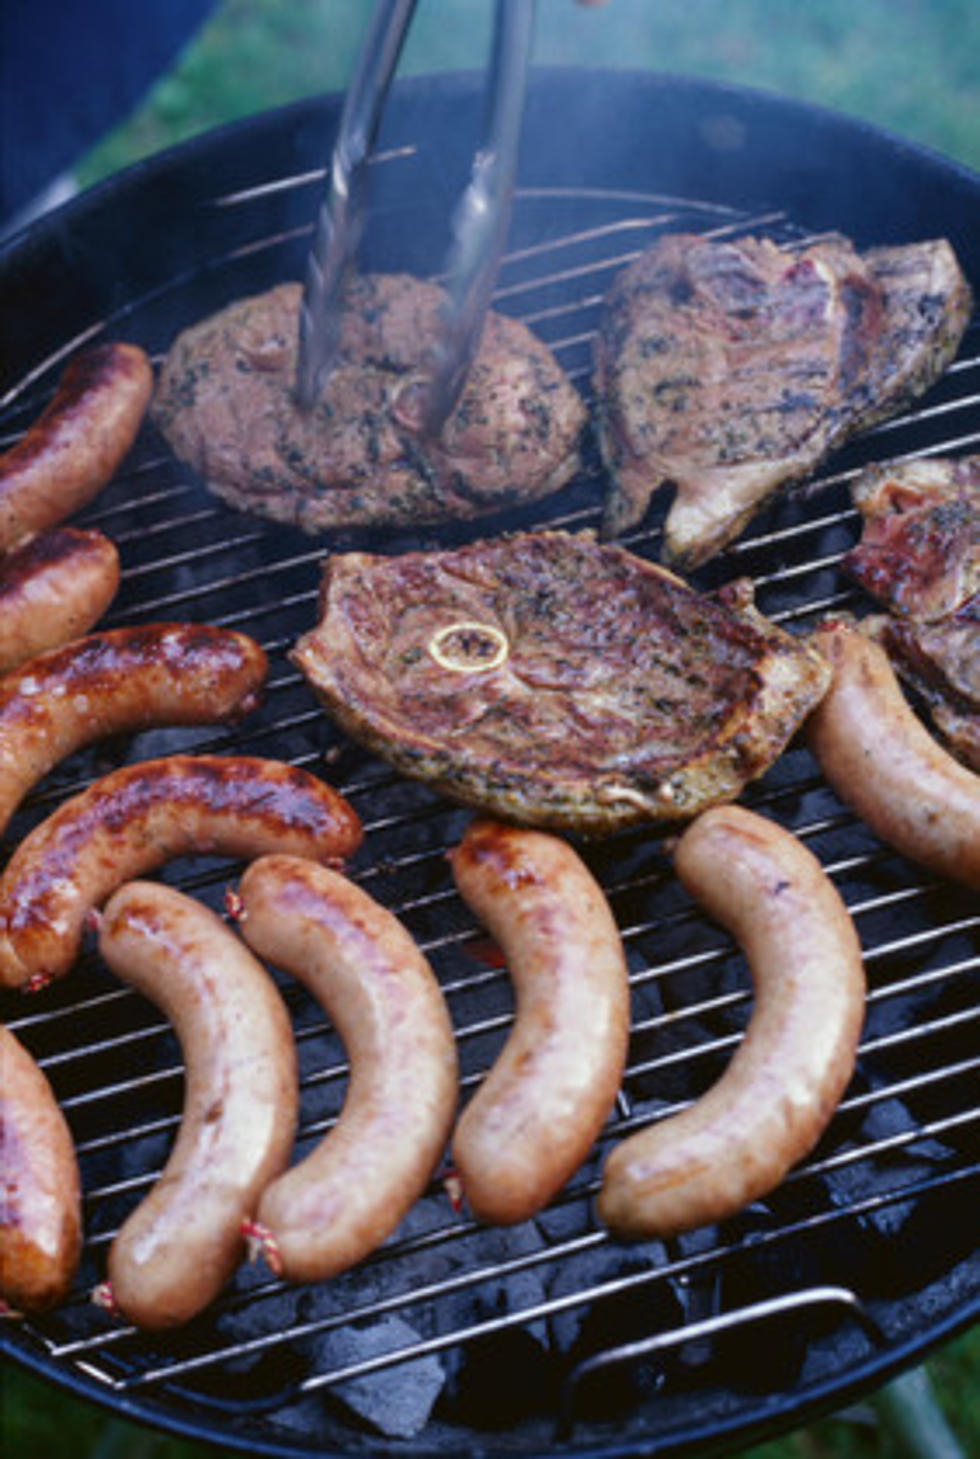 Meat Sold In New York State Recalled Due To ‘Temperature Abuse’